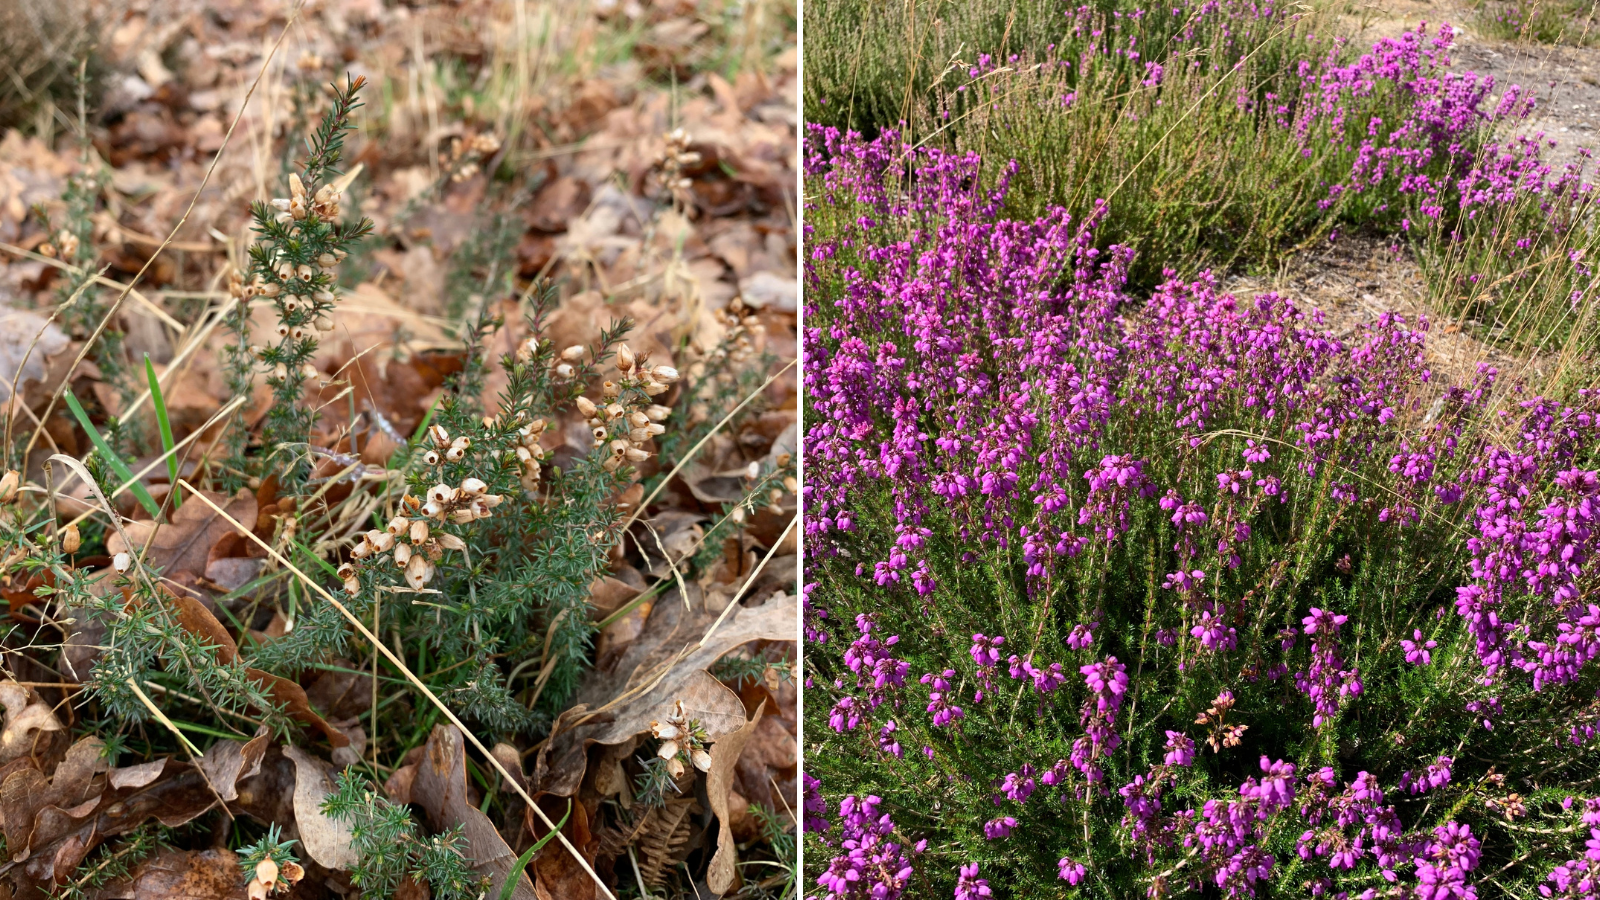 Two photos of Bell Heather. On the left in winter, with dry flower heads. On the right in summer, with vibrant magenta flowers.